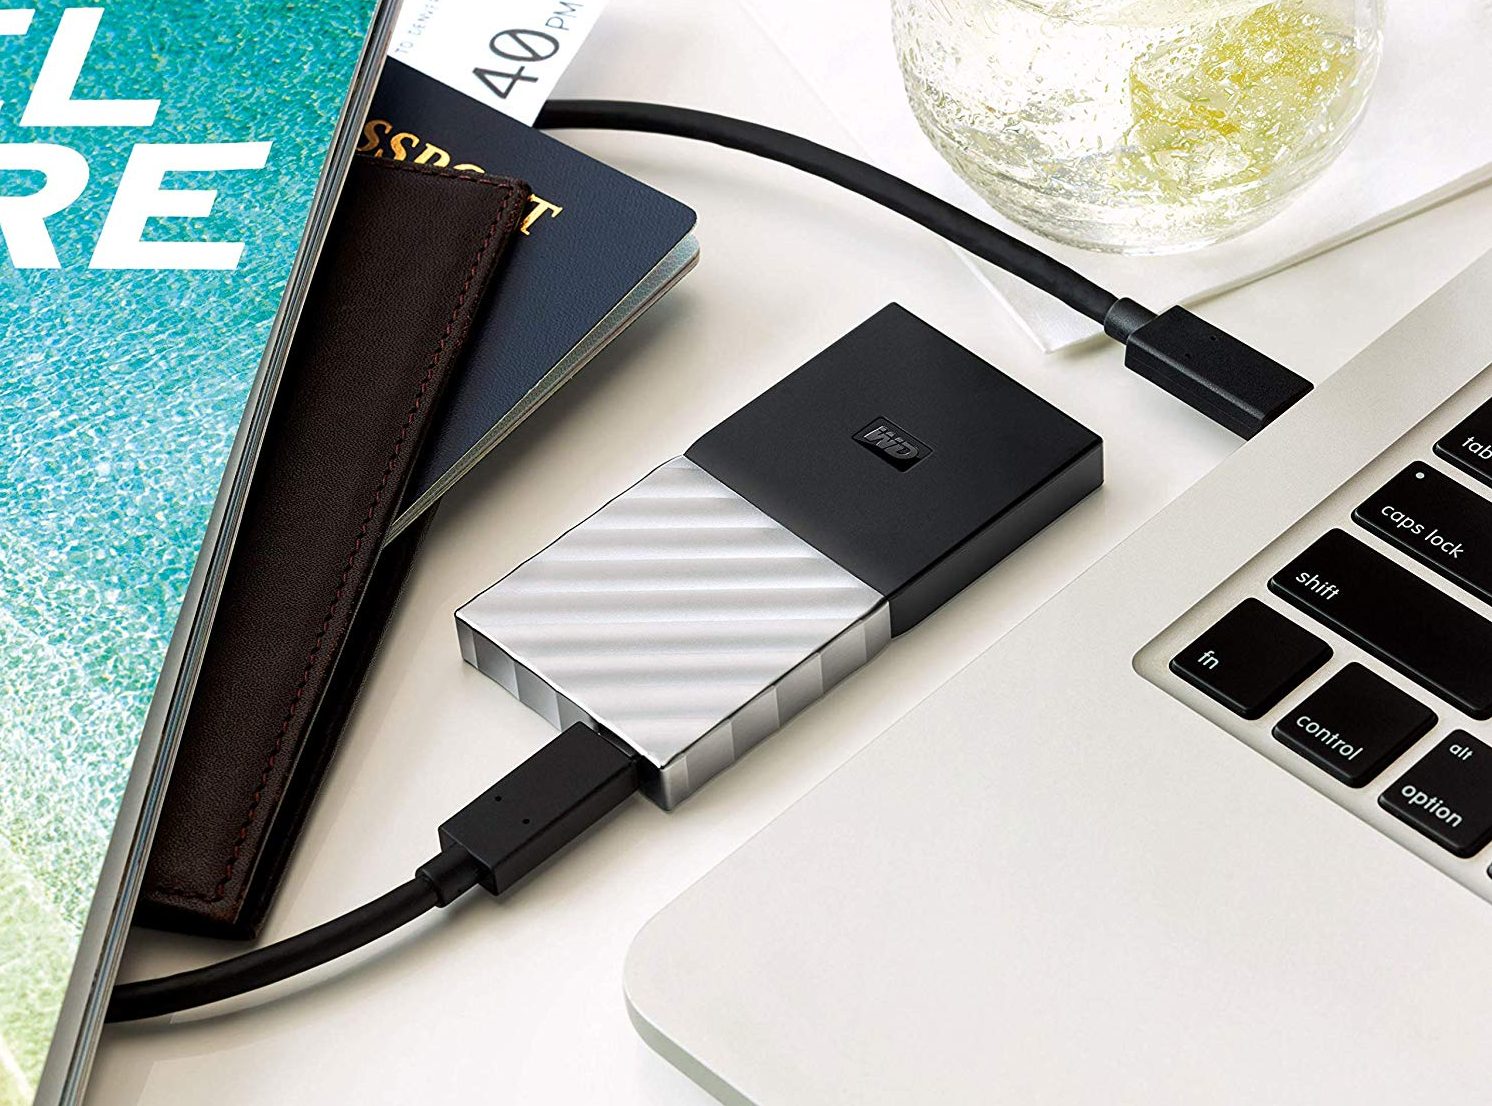 a portable SSD Great Mac gifts and accessories